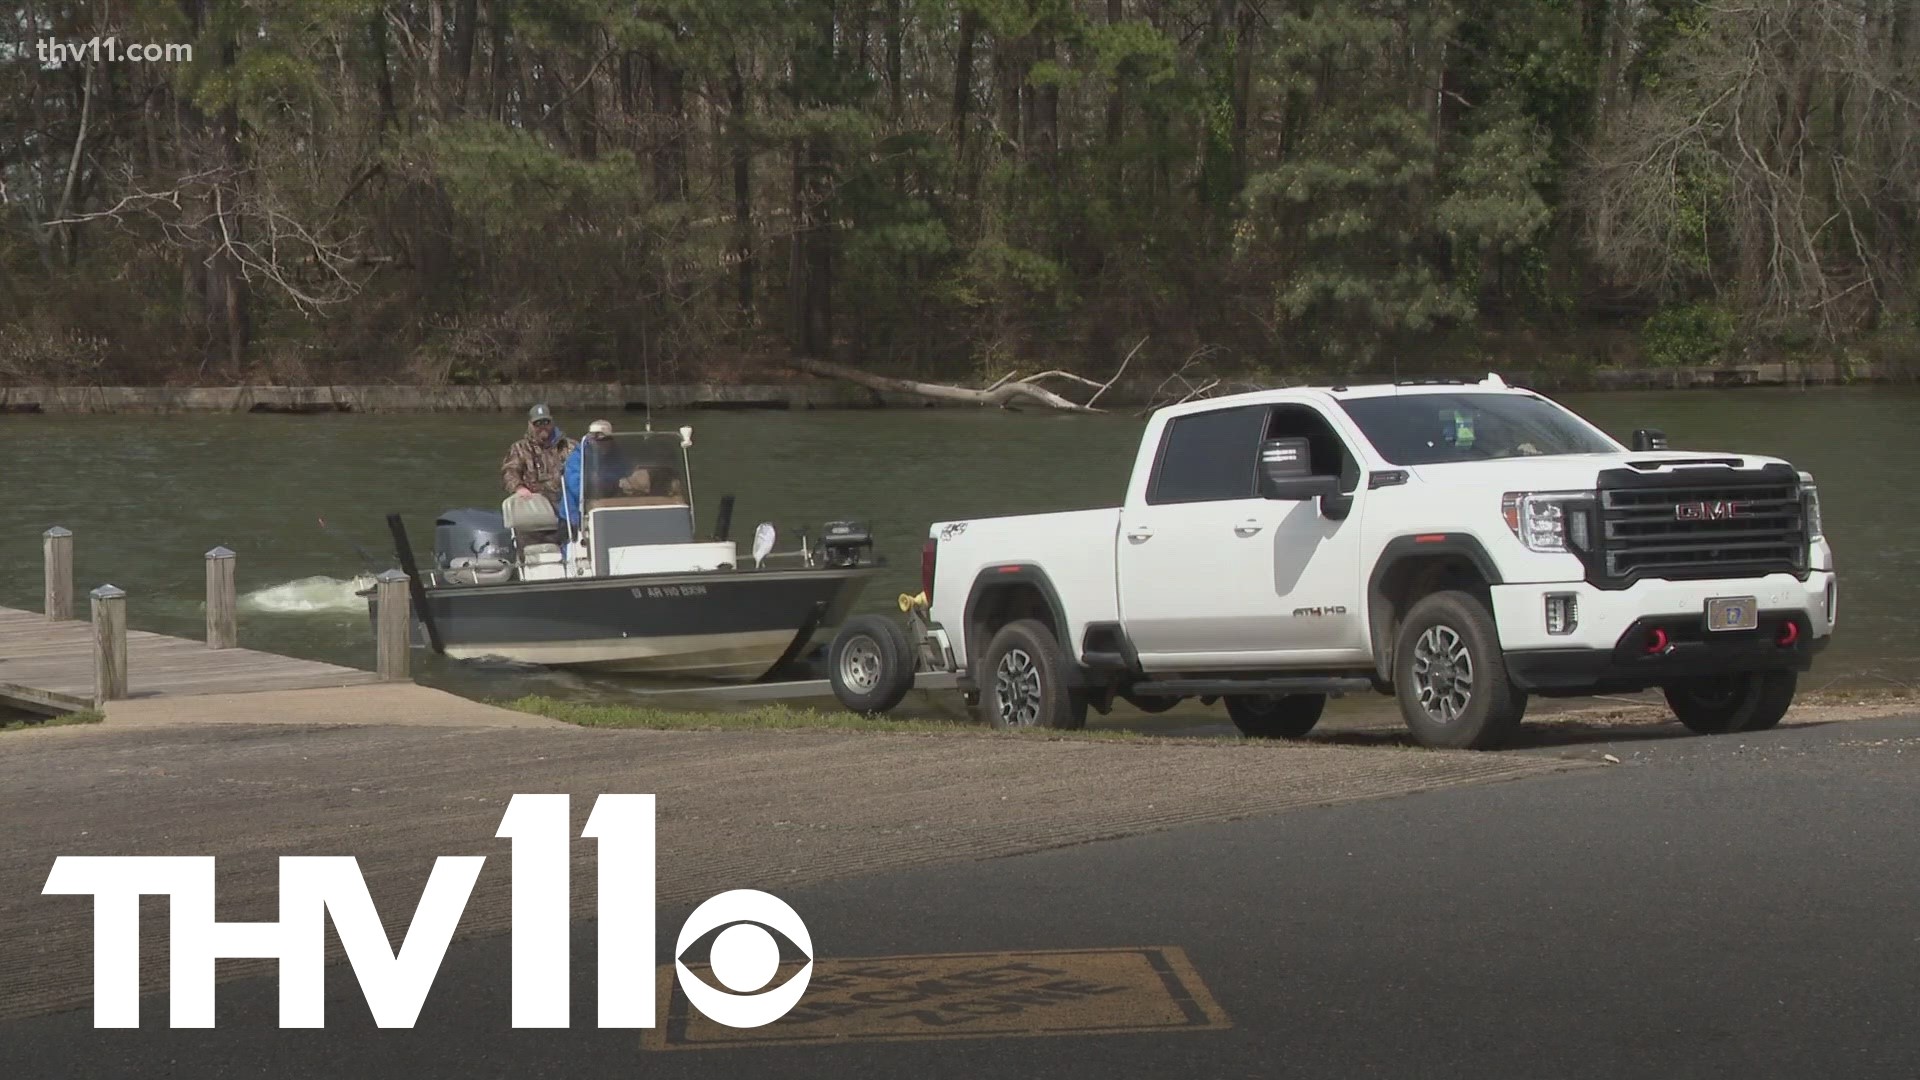 Spring Break is officially underway in Arkansas, and with many already taking advantage by hitting the water and hiking trails, officials have safety tips.